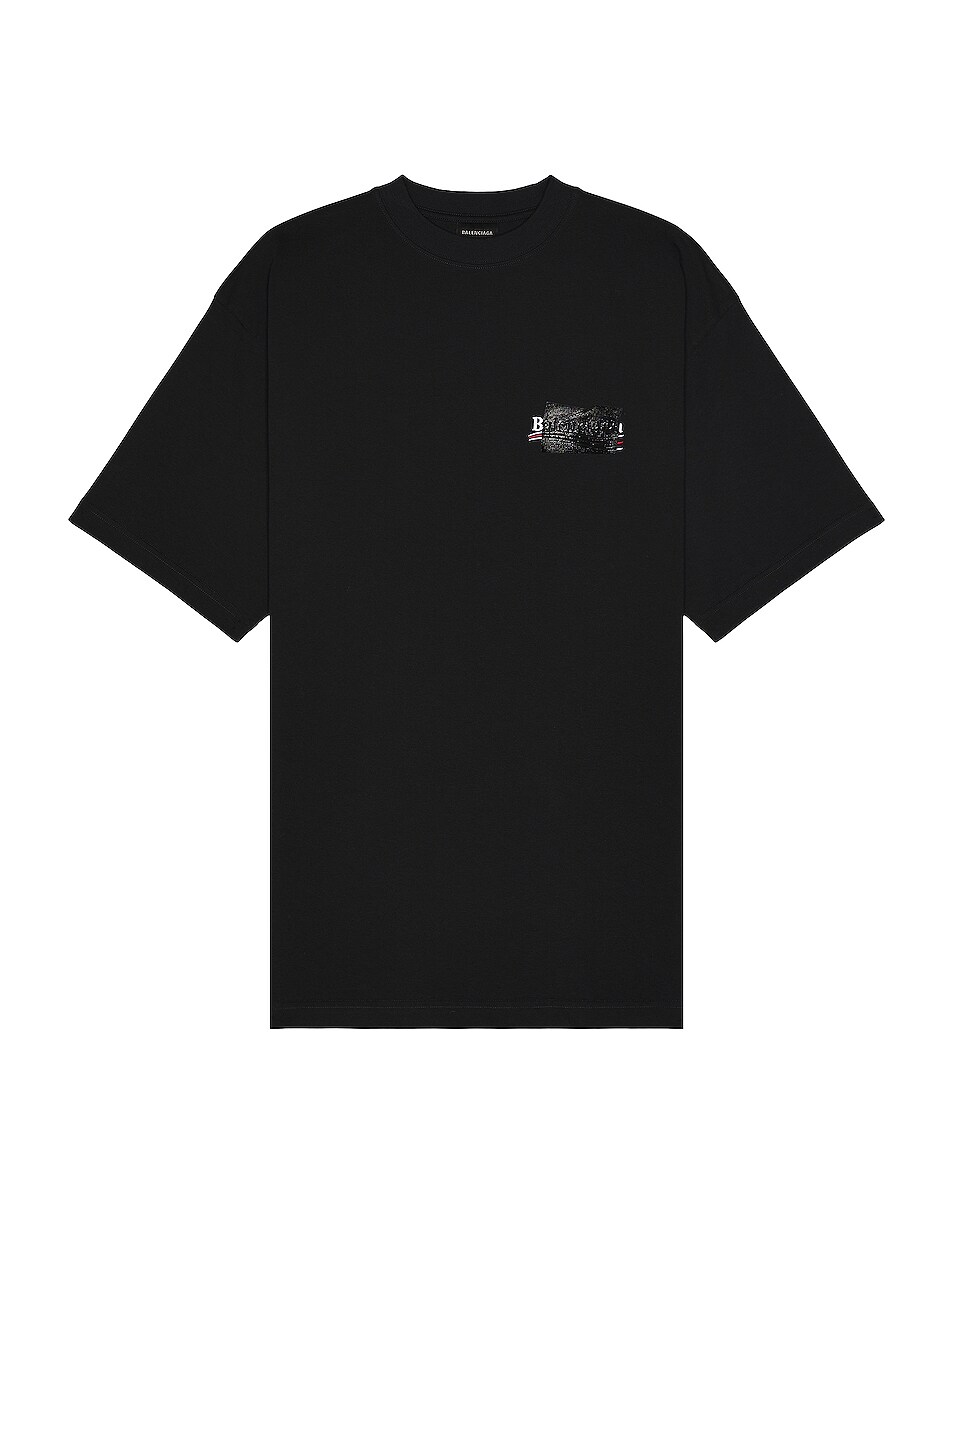 Image 1 of Balenciaga Large Fit T-Shirt in Black, White & Red